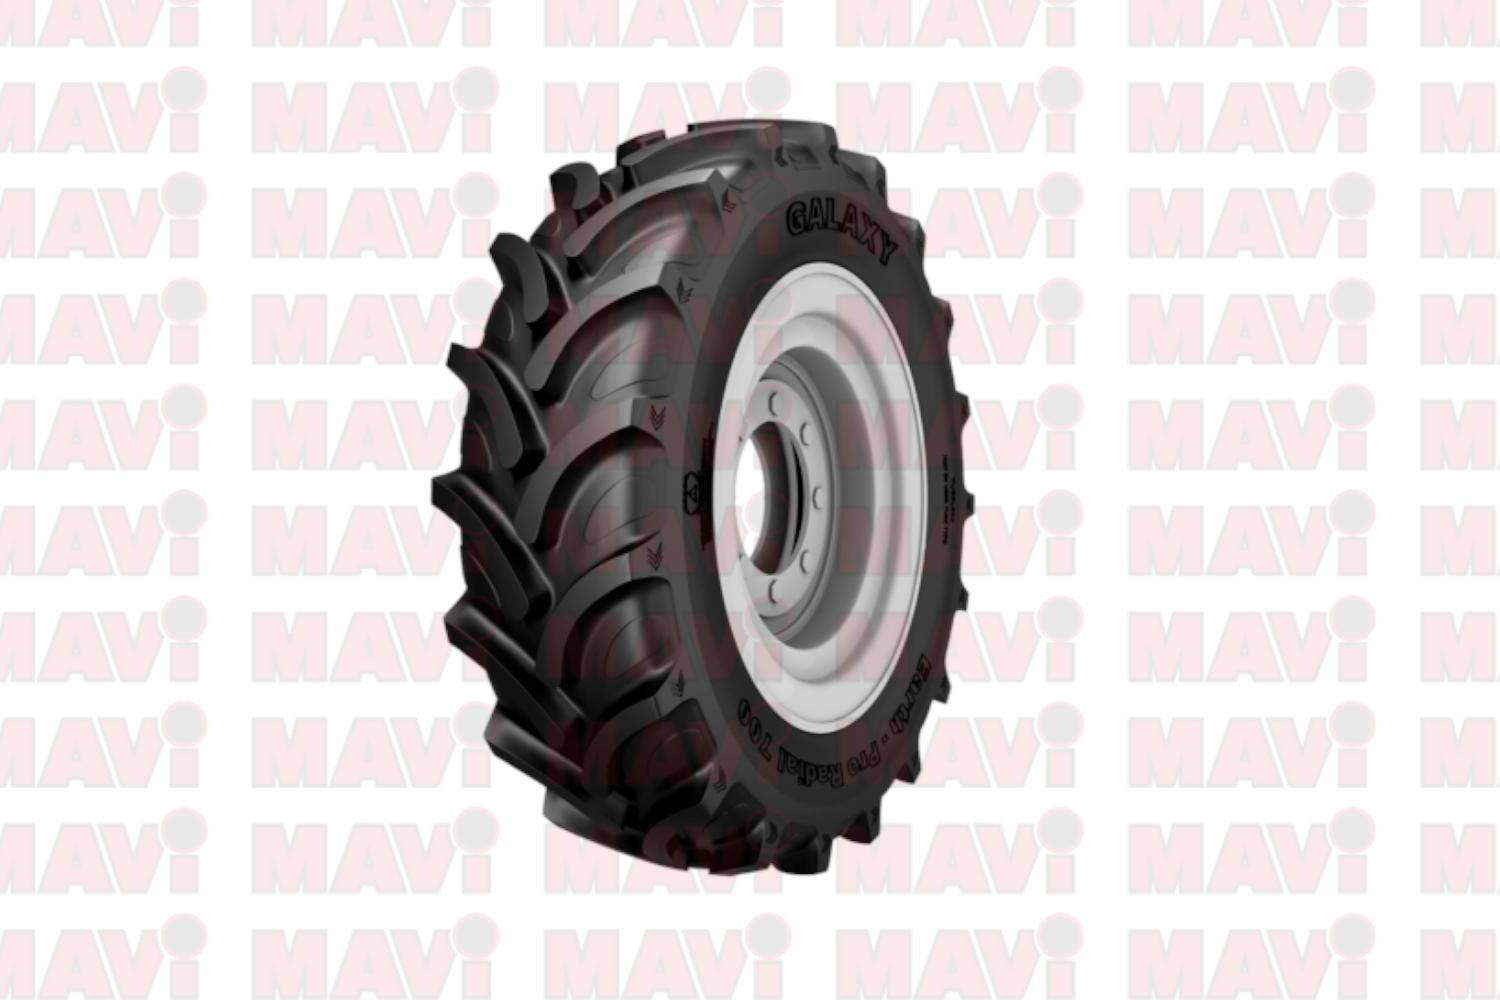 Anvelope agricola Galaxy, 380/70R24, Earth Pro Radial 700, TL, radiala # 575780